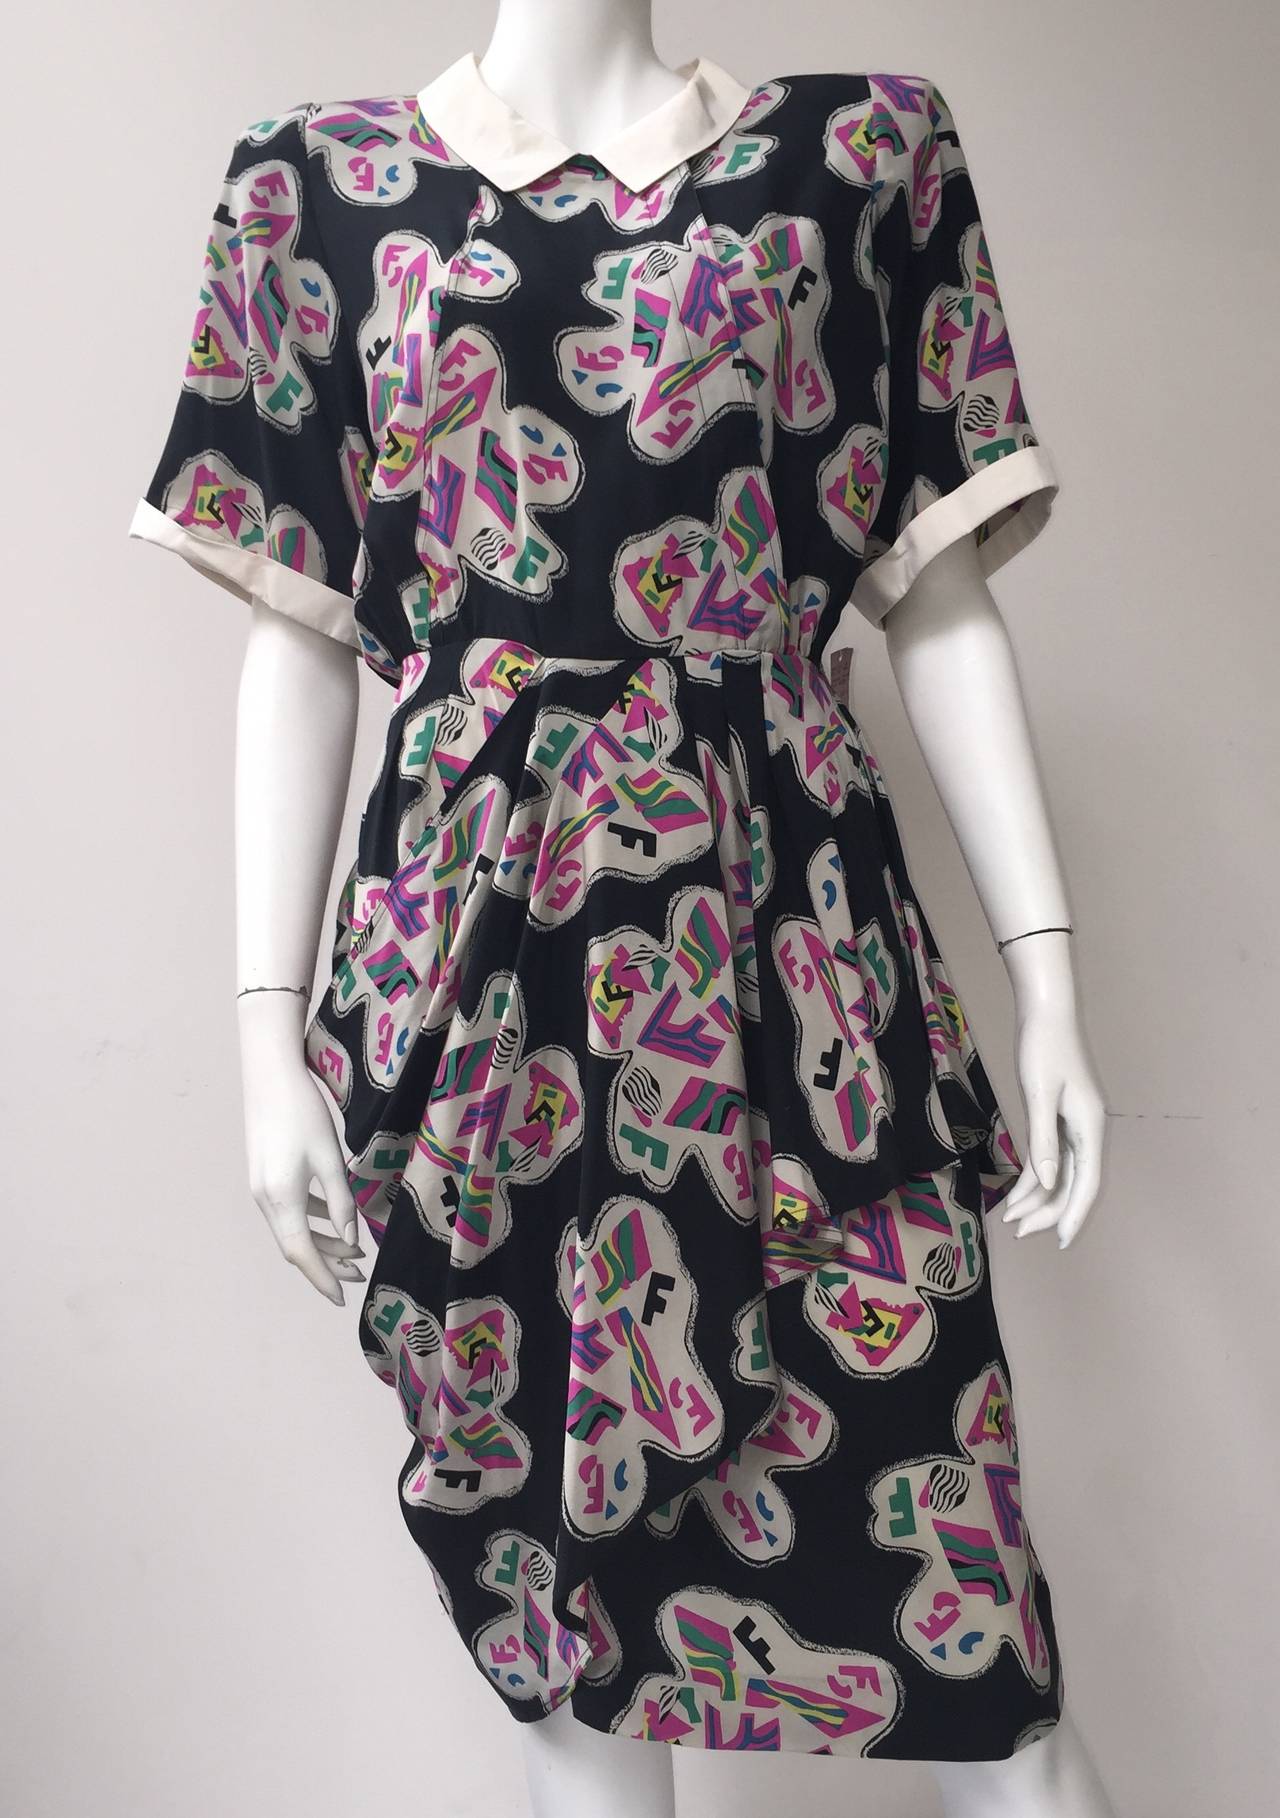 Fendi by Karl Lagerfeld for Neiman Marcus 80s still with original tag silk dress size 44 but fits like a modern day size 6 (please see & use measurements).
Powerful shoulder pads that can be removed for a more updated look.
There are 4 buttons up